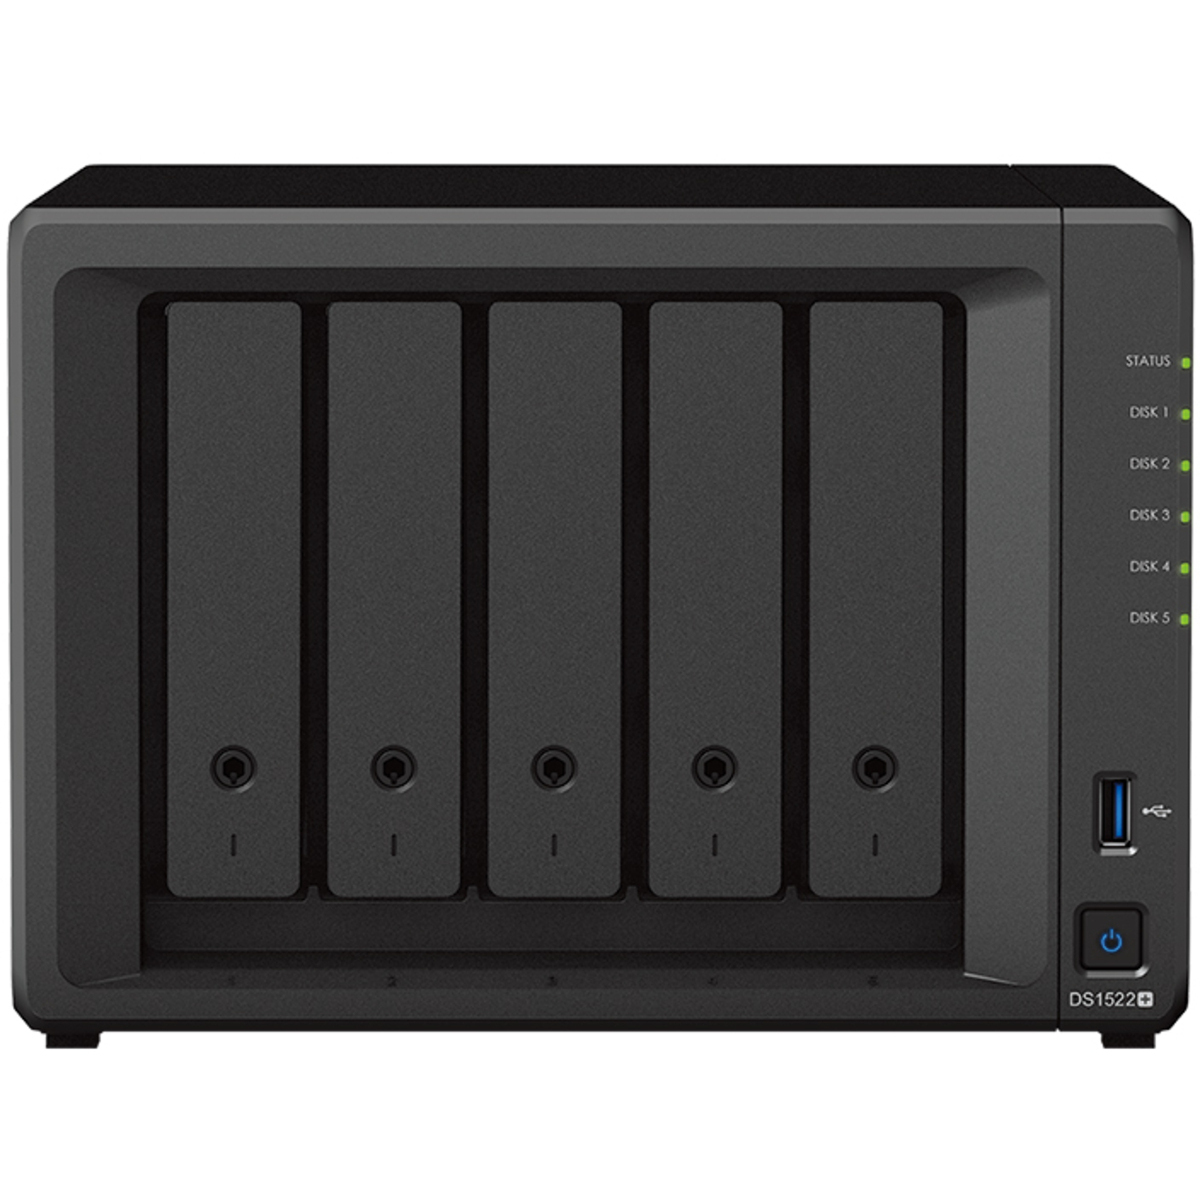 Synology DiskStation DS1522+ 50tb 5-Bay Desktop Multimedia / Power User / Business NAS - Network Attached Storage Device 5x10tb Western Digital Gold WD102KRYZ 3.5 7200rpm SATA 6Gb/s HDD ENTERPRISE Class Drives Installed - Burn-In Tested - ON SALE DiskStation DS1522+